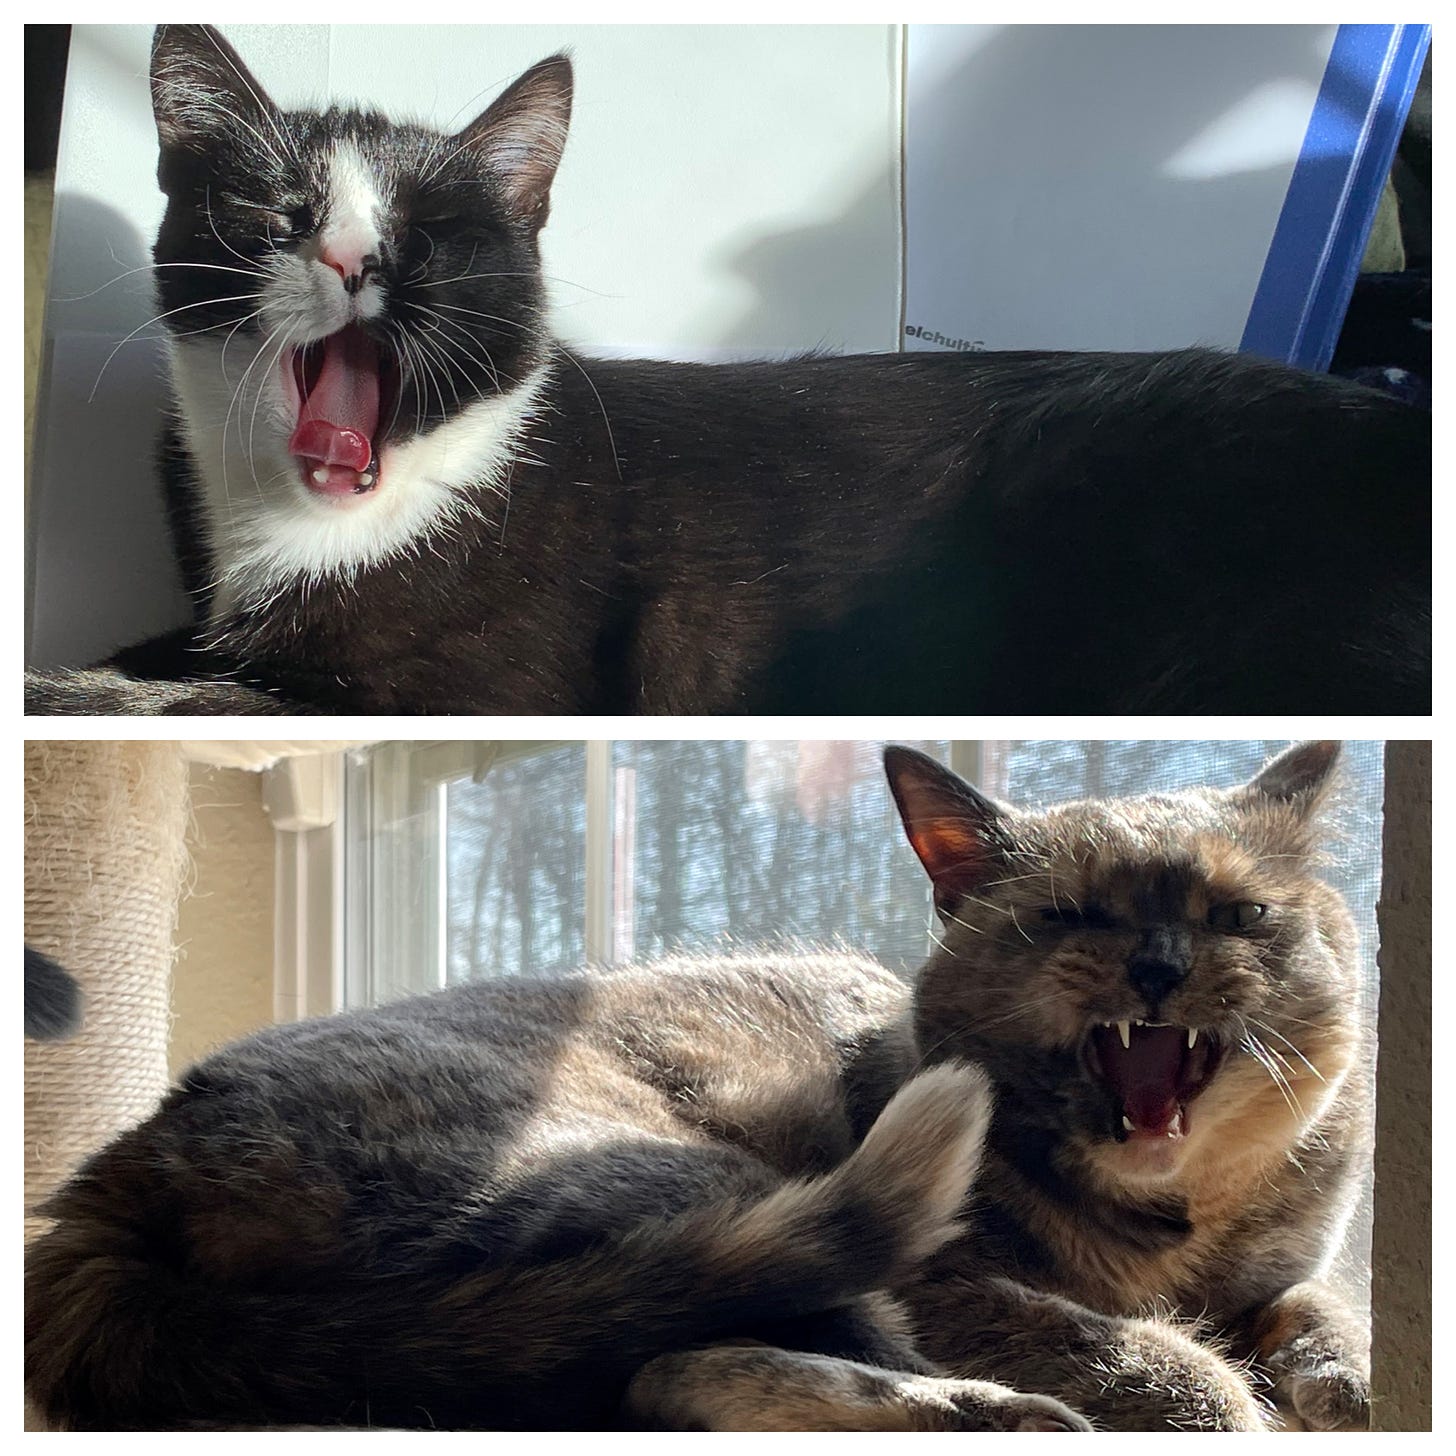 Top: a tuxedo cat lying on his belly on an open white looseleaf binder, with his head turned to face the camera, yawning dramatically. Bottom: a dilute tortoiseshell cat curled up on a cat tree beside a window, looking up at the camera, in the middle of a yawn with one eye slightly open.